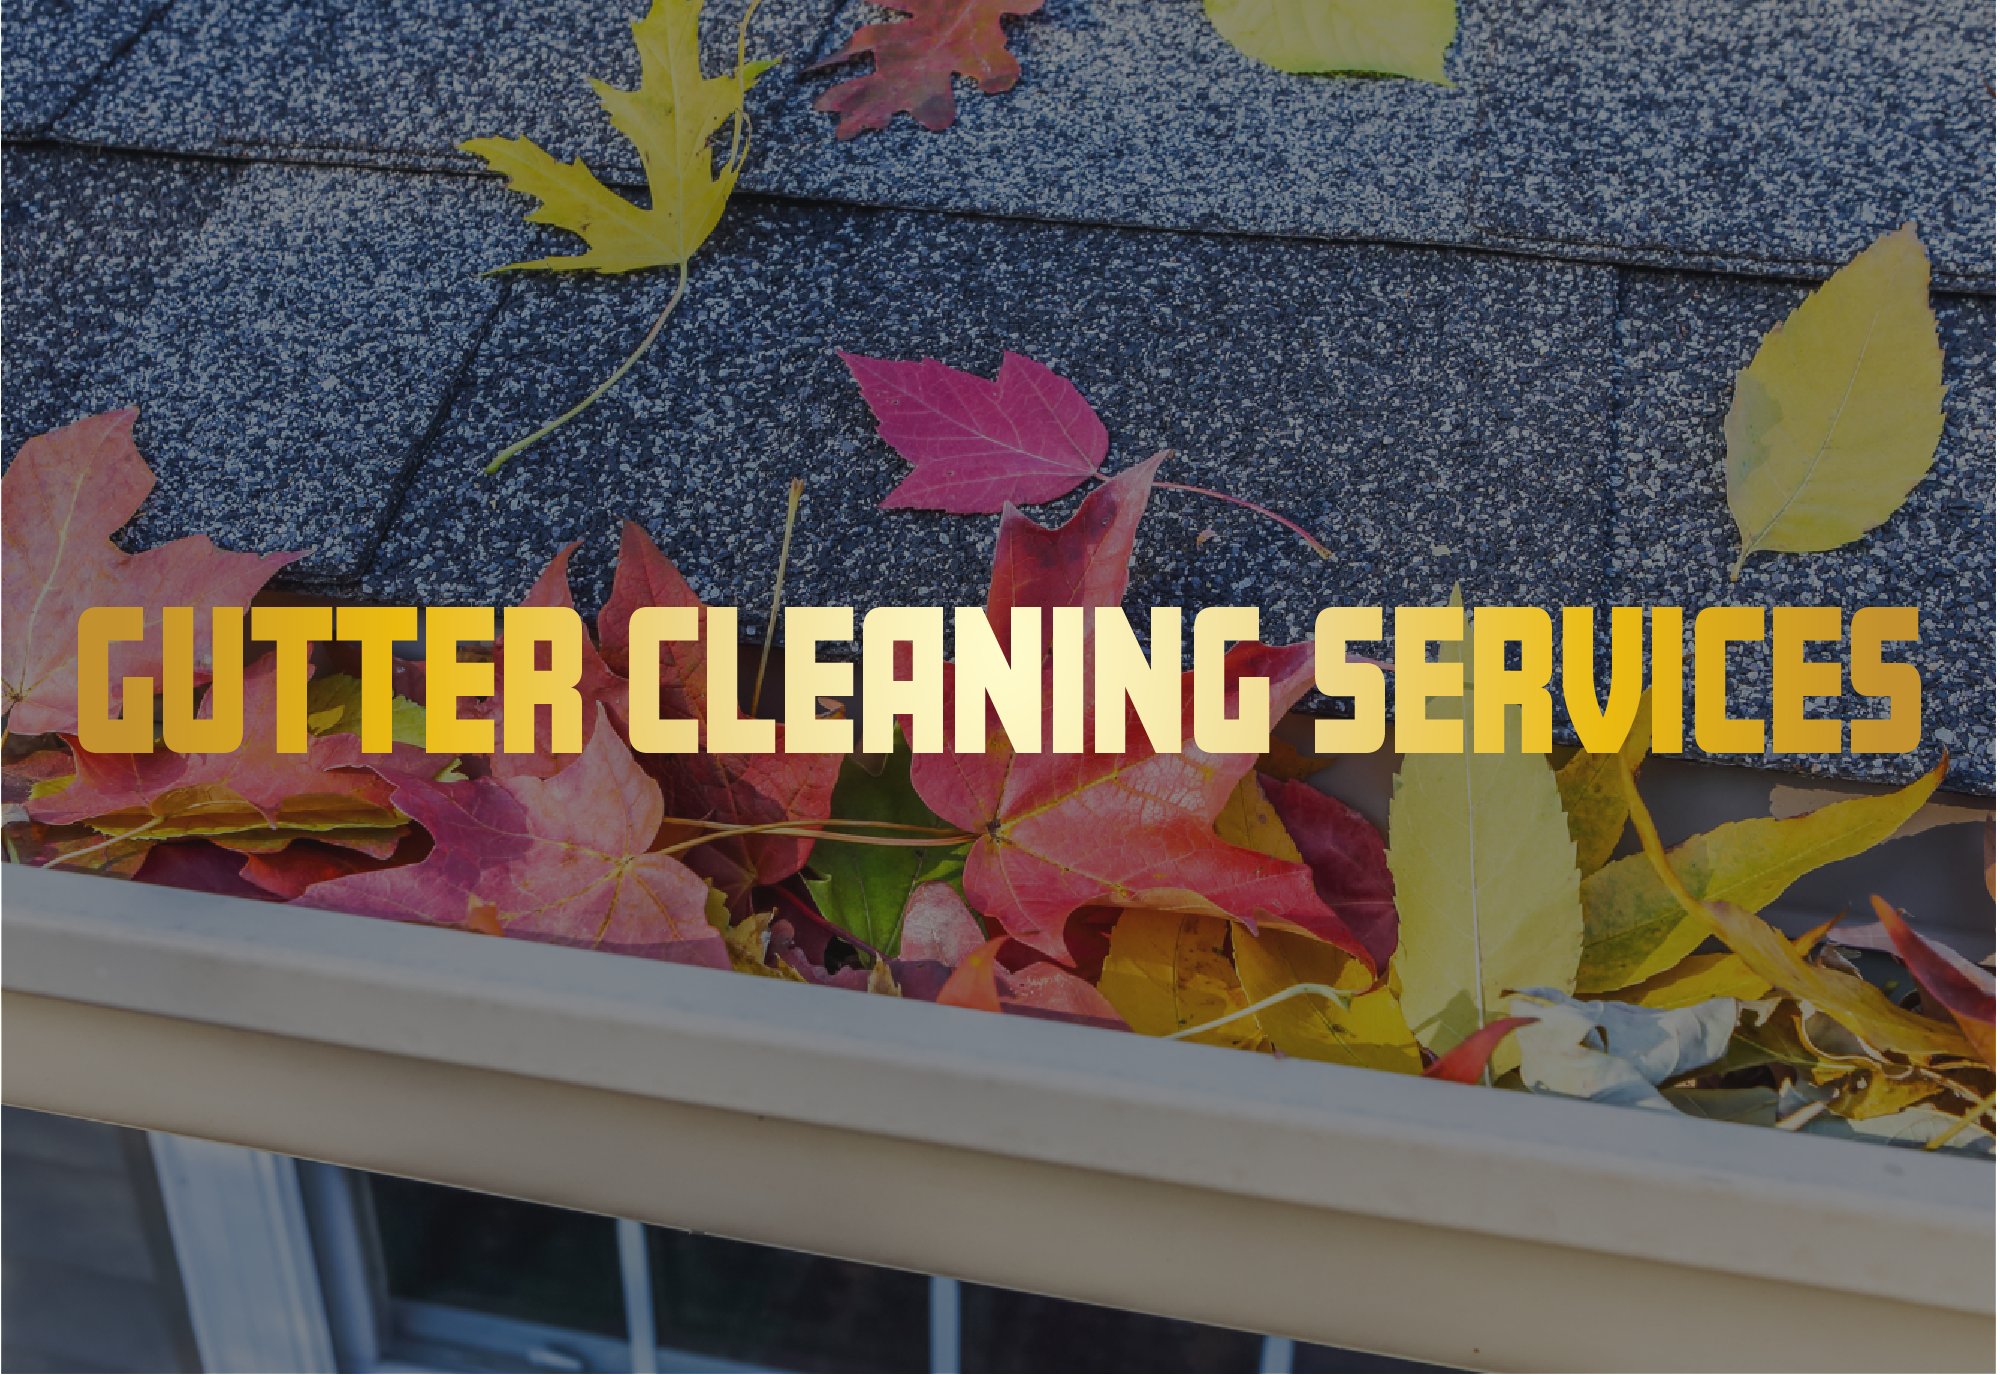 gutter cleaning service home page link